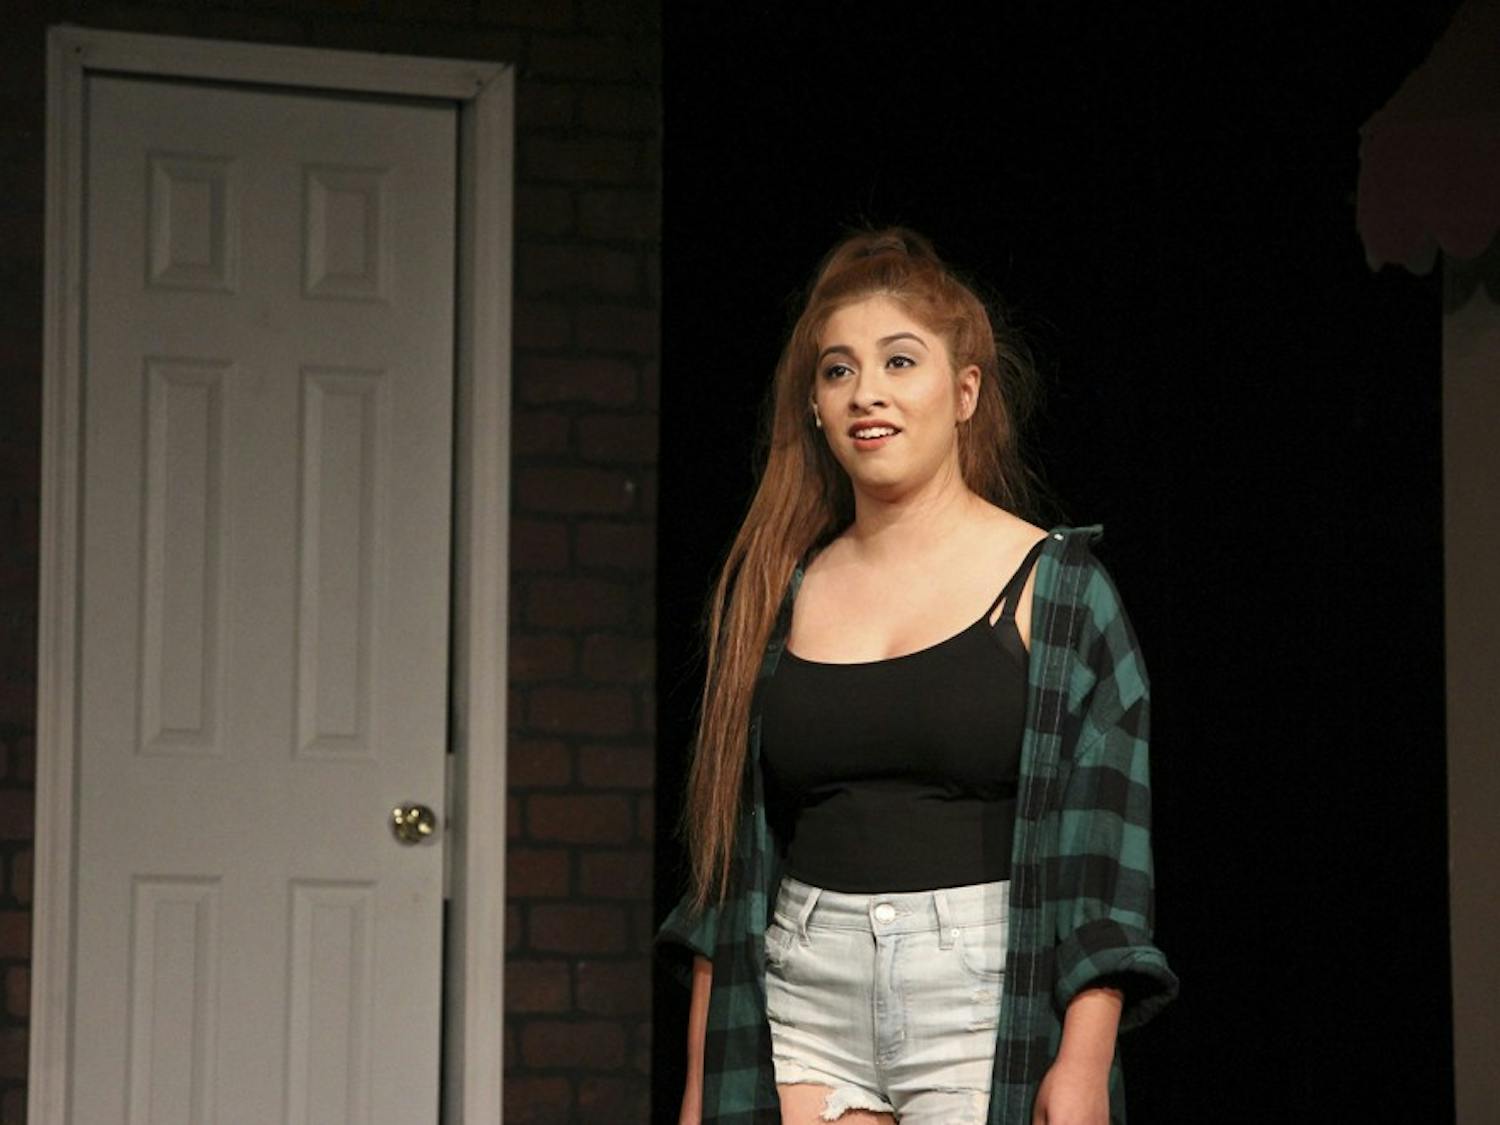 North Carolina junior Stefanie Clinton performs in Pauper Players’ production of “In the Heights” last weekend.&nbsp;Photo Courtesy of Stefanie Clinton.